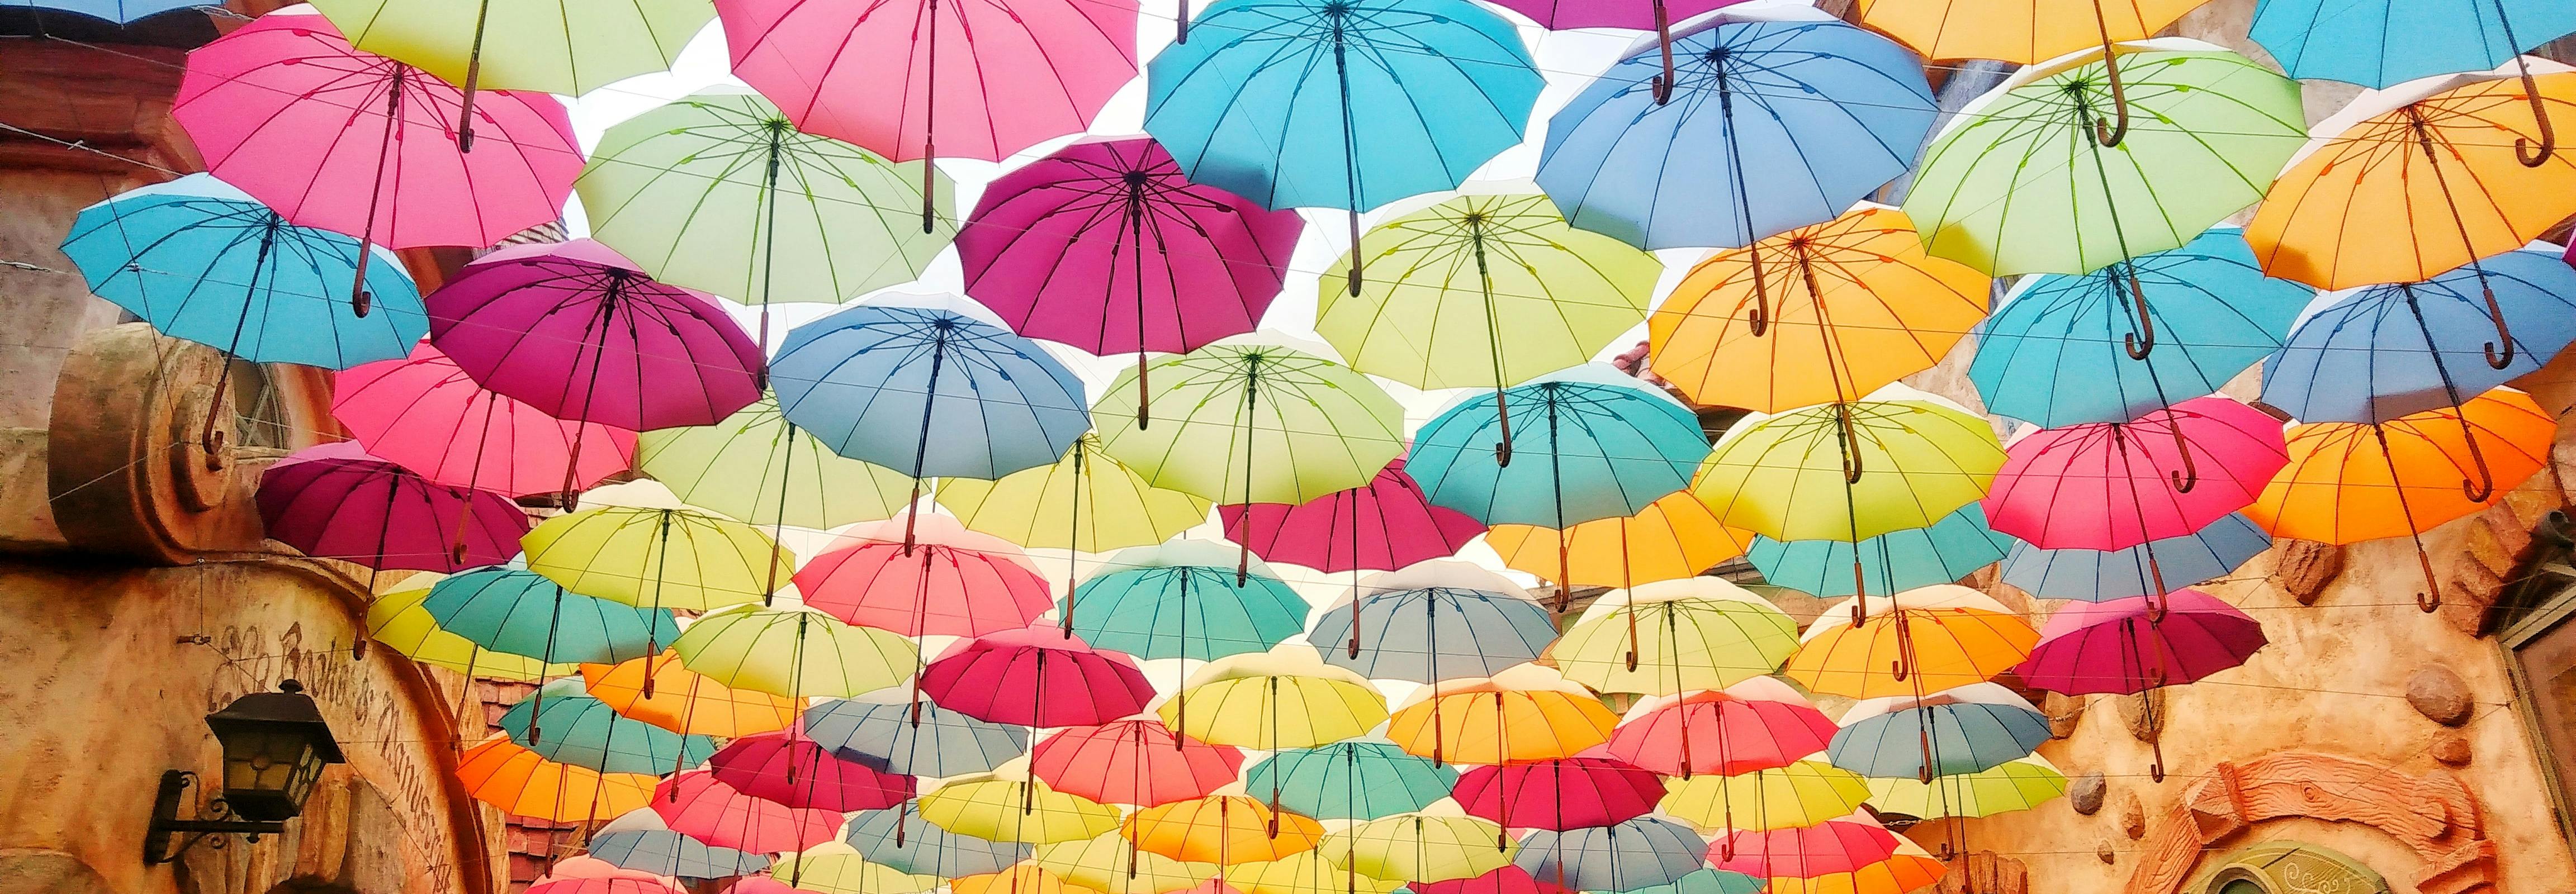 Rows of colorful umbrellas hang and form a roof above an old-timey street. Light shines from between and through the umbrellas, casting the street in a soft light. Photo by Helen Cheng on Unsplash.